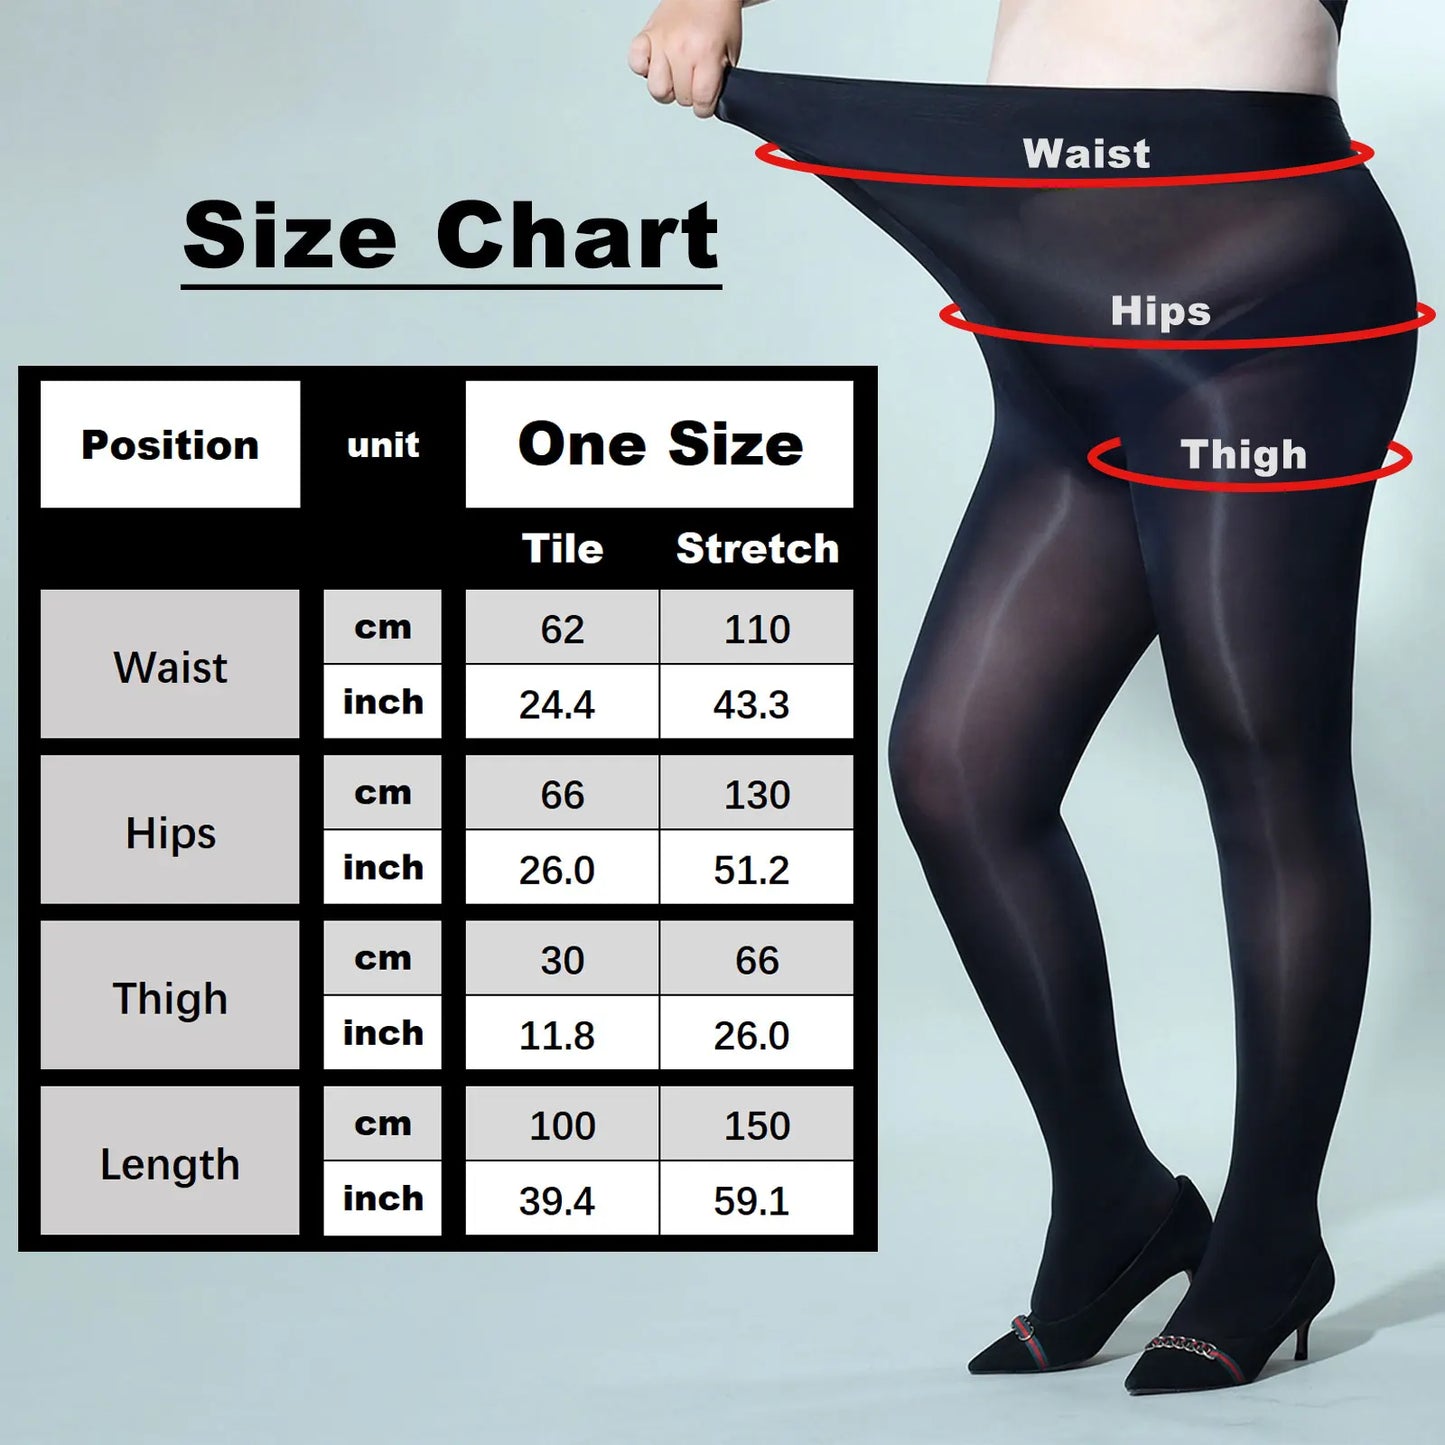 Metelam Women Shiny Glossy Pantyhose Sheer Stockings Open Crotch Tights Plus Size